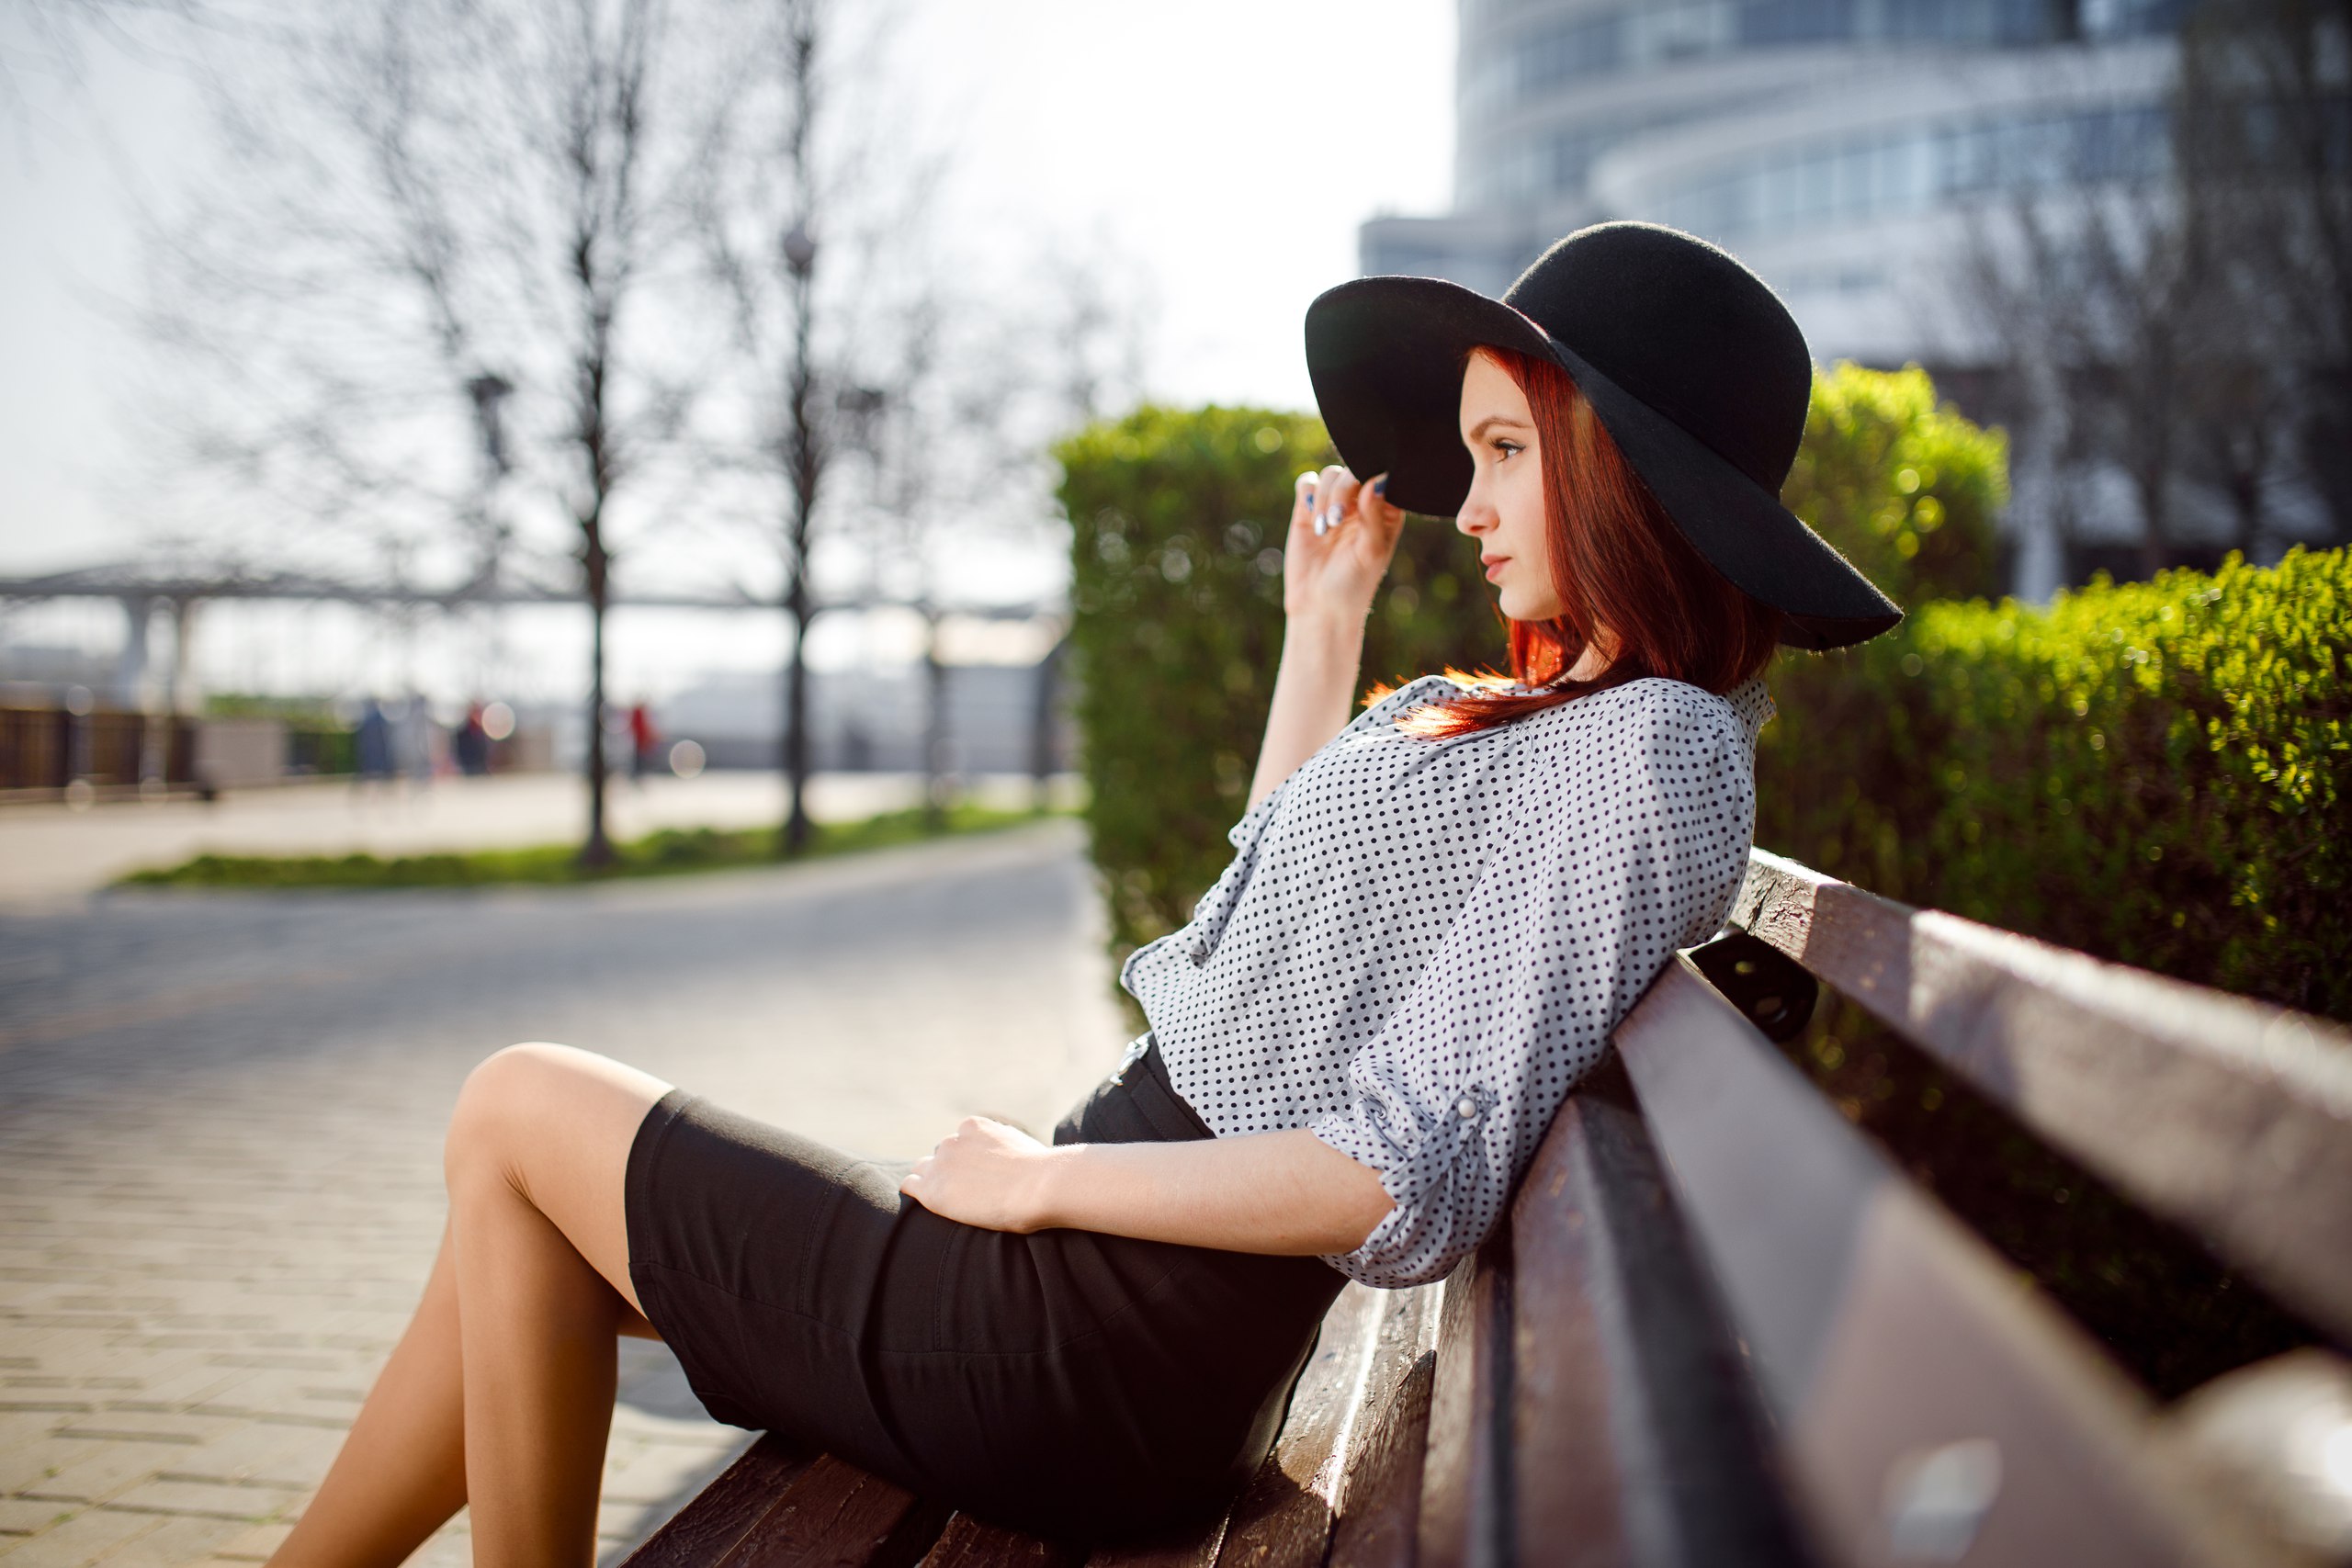 People 2560x1707 women model redhead portrait outdoors women with hats hat blouses skirt black skirts sitting bench bushes depth of field profile looking into the distance women outdoors